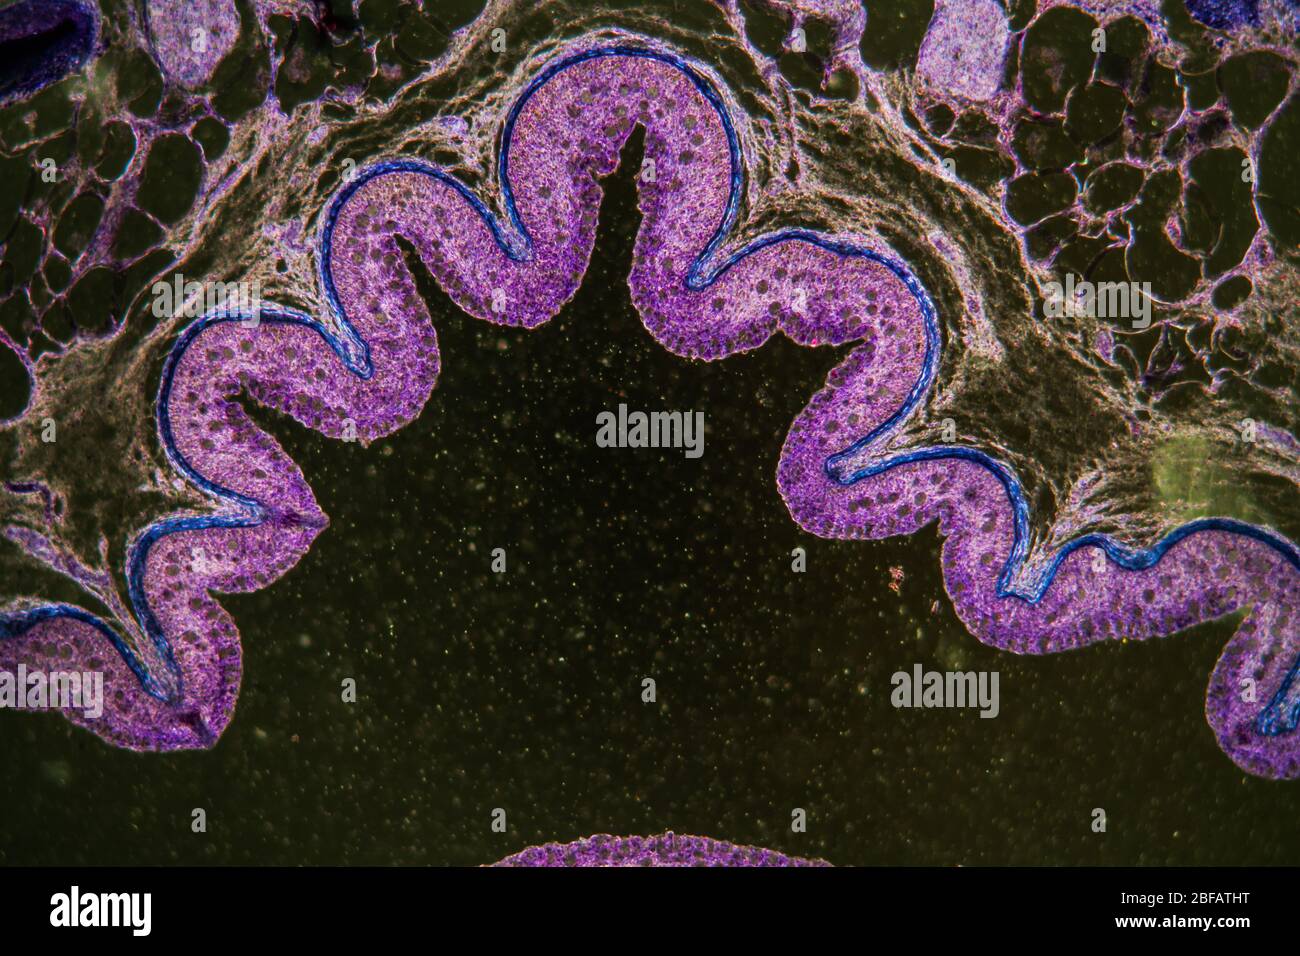 Bowel with goblet cells in the dark field 100x Stock Photo